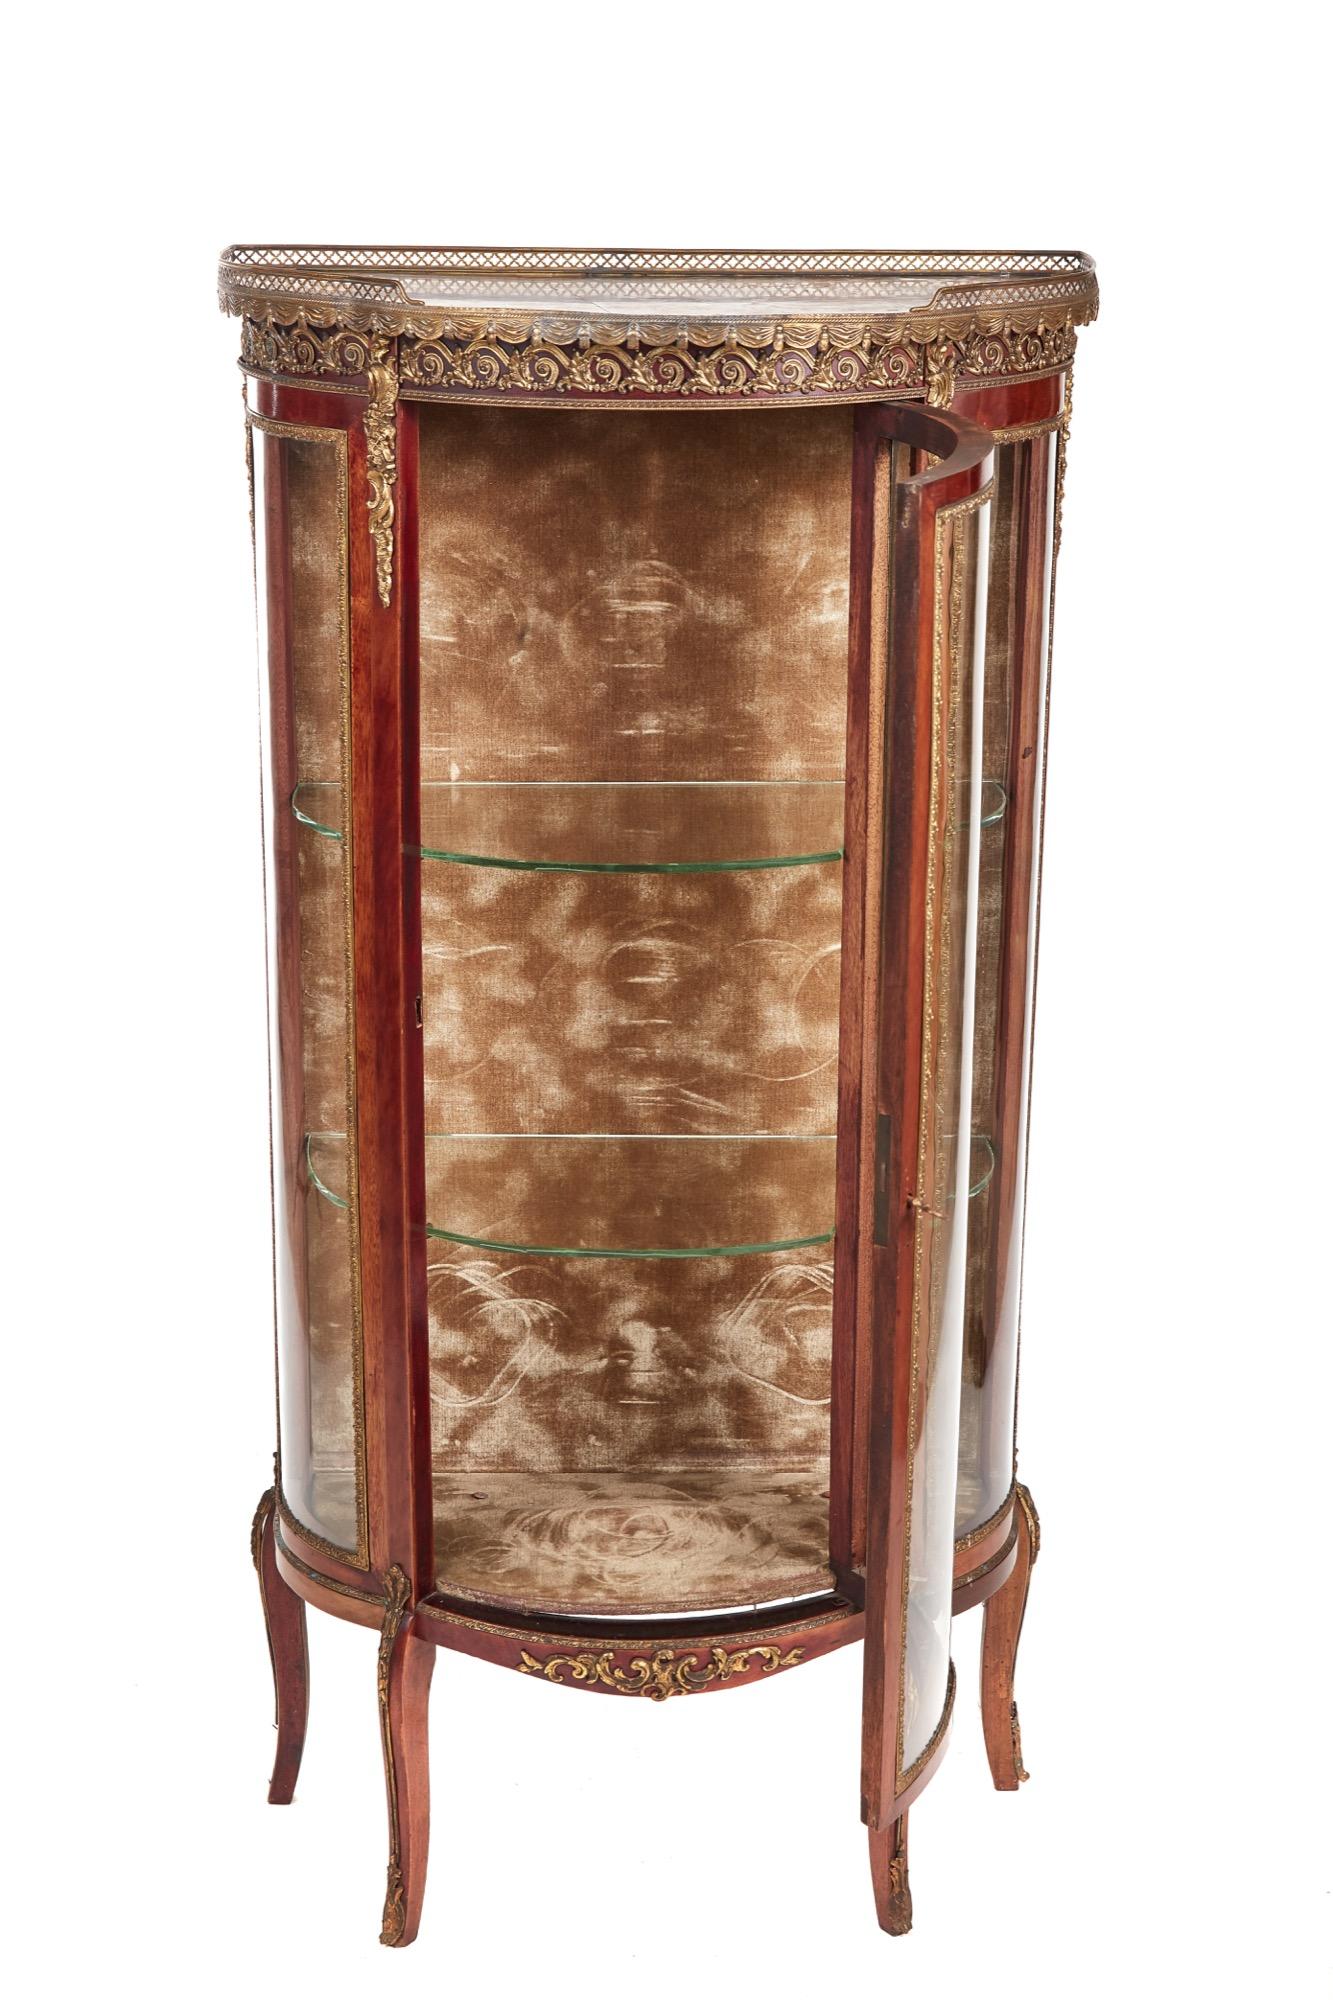 Antique 19th century French mahogany and gilded brass vitrine which has a beautiful pierced brass gilded gallery and inset marble. The bowed glazed shaped ends has very attractive gilded mounts and the bow fronted doors open to reveal the original